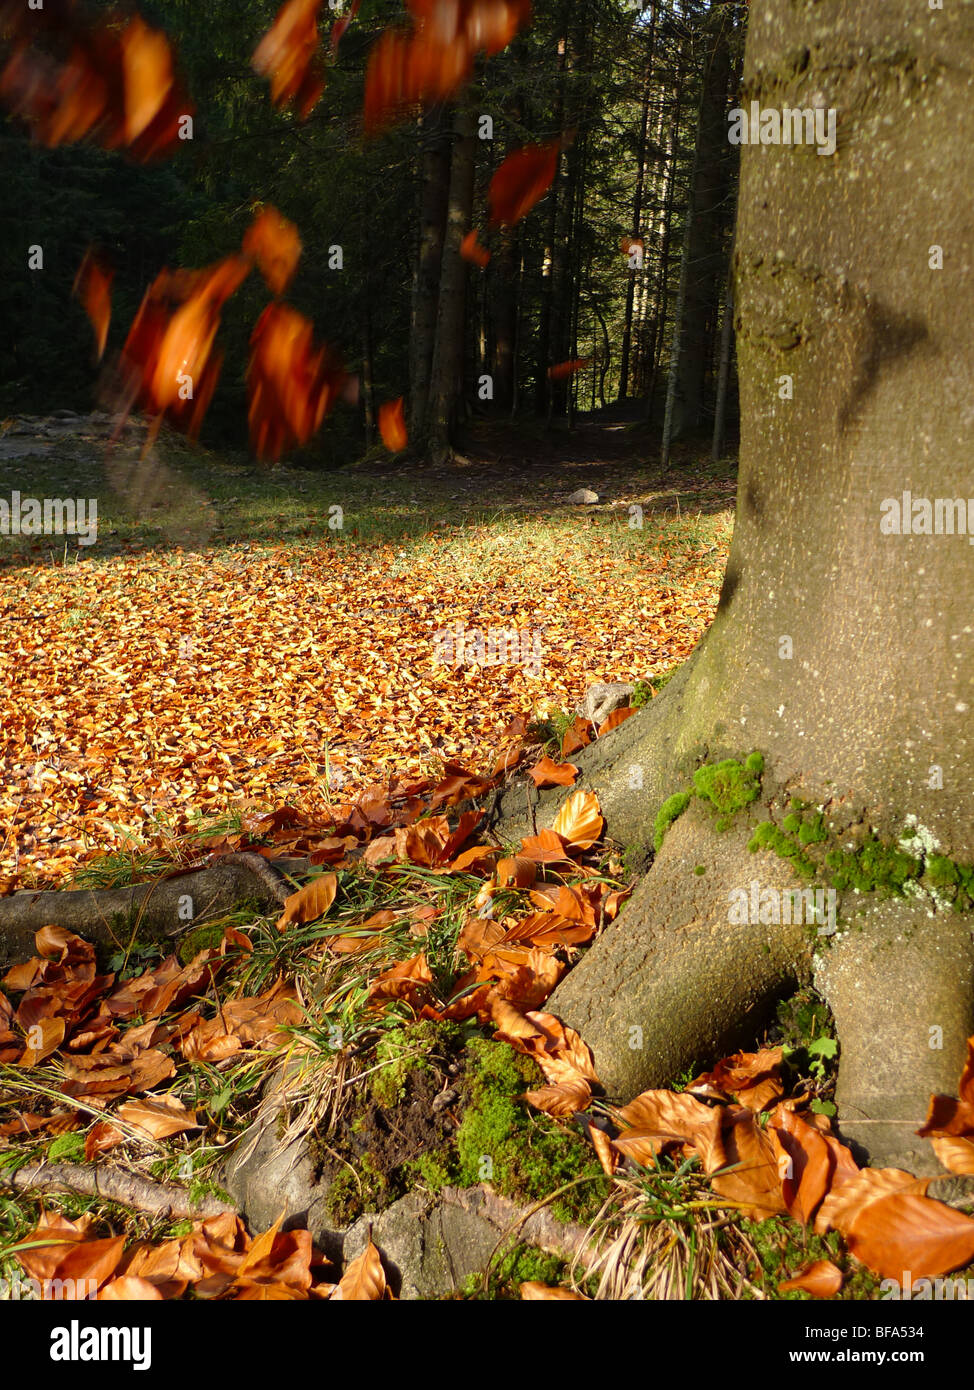 Autumn leafs falling from a tree Stock Photo